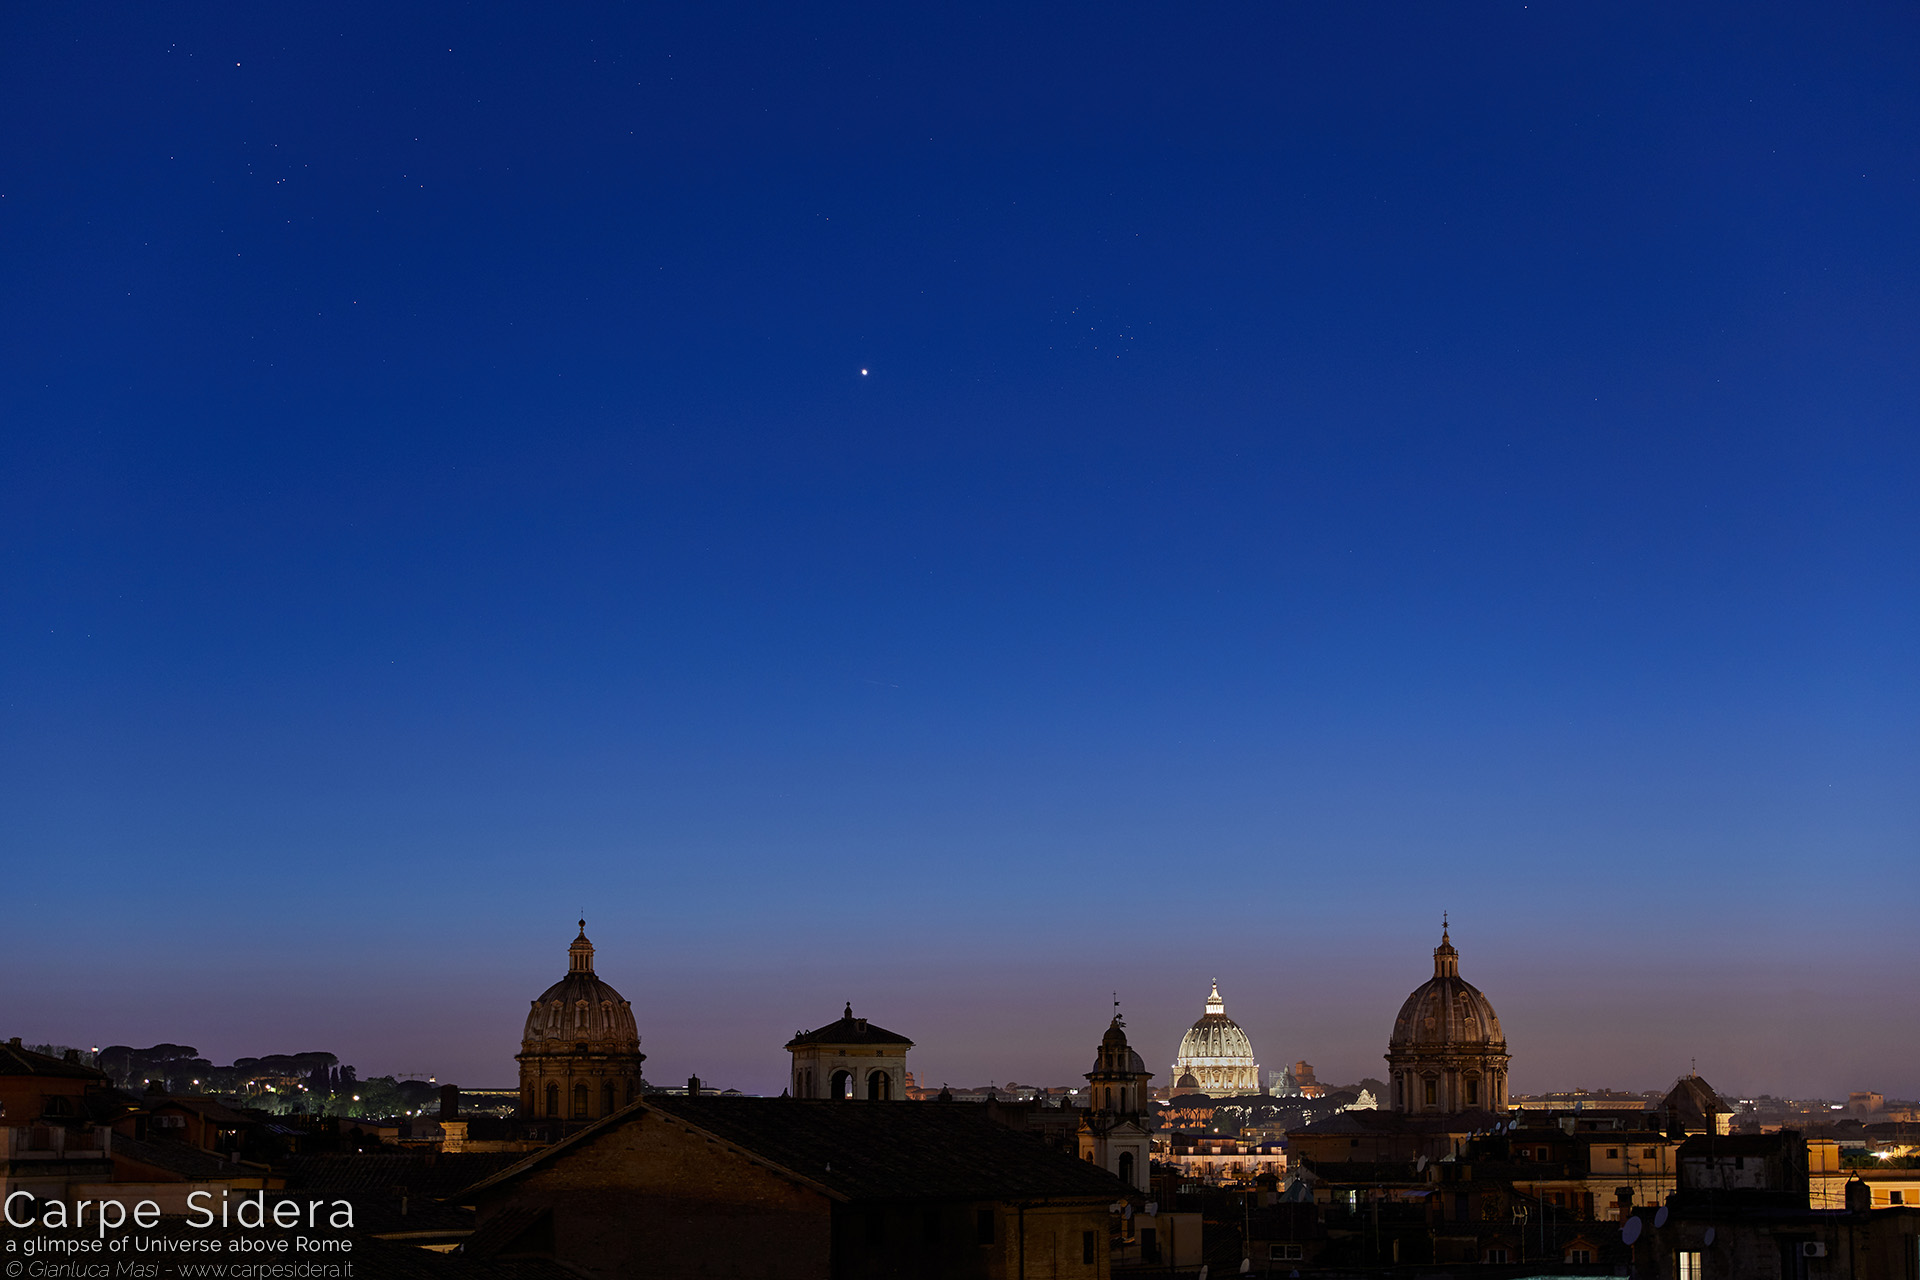 17. Planet Venus and the Pleiades have a conjunction above some domes of the Eternal City.